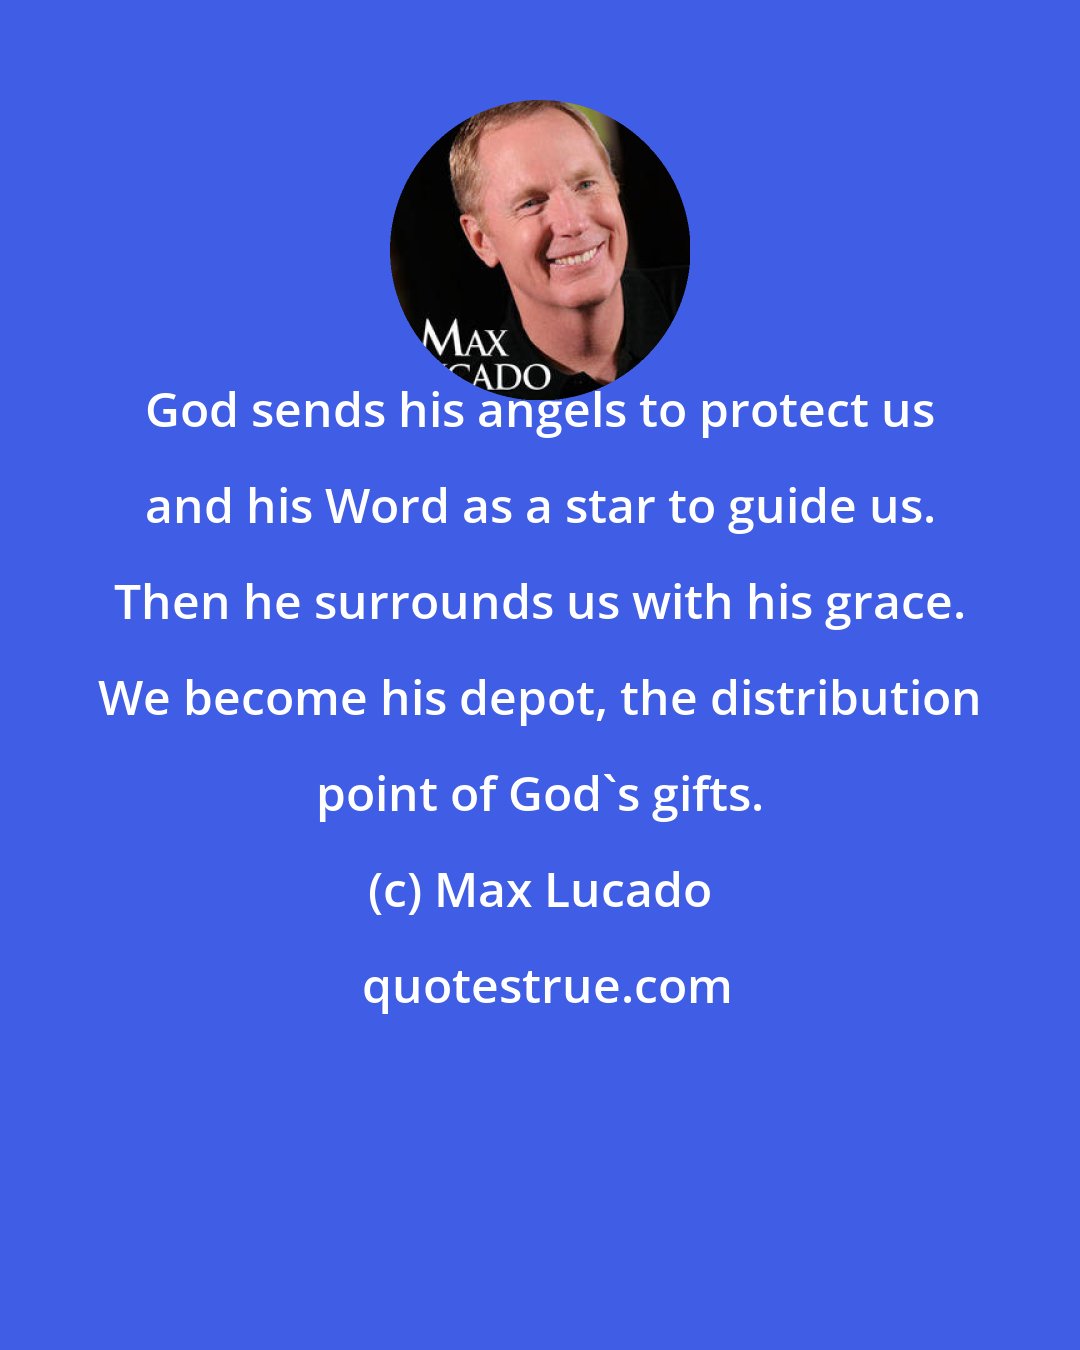 Max Lucado: God sends his angels to protect us and his Word as a star to guide us. Then he surrounds us with his grace. We become his depot, the distribution point of God's gifts.